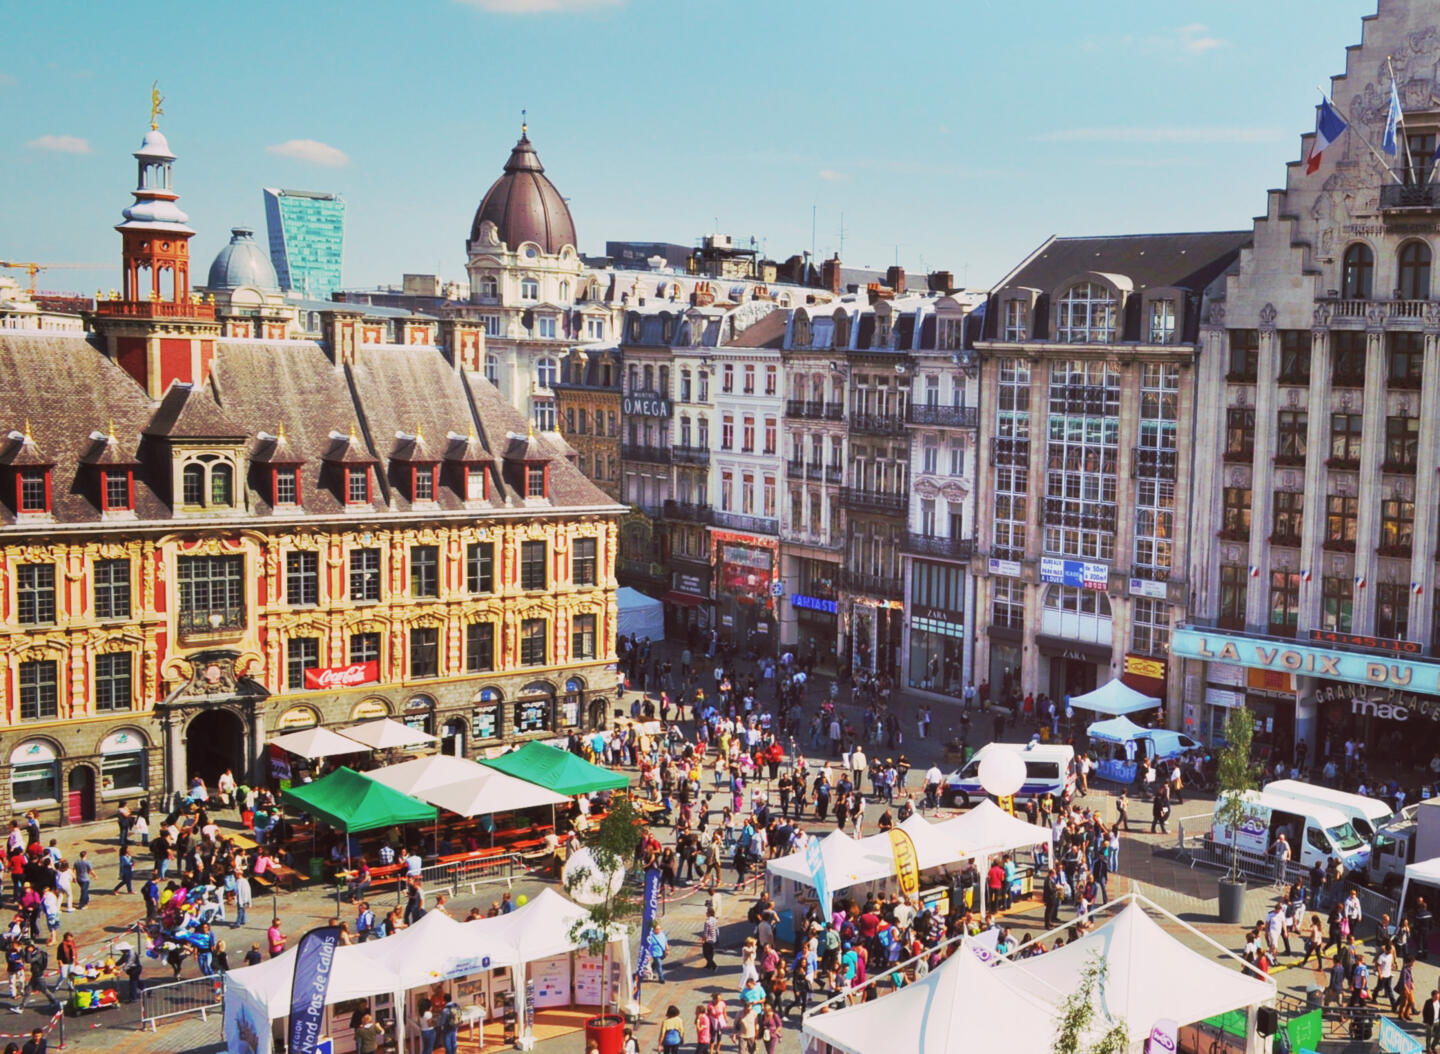 Lively square during the Lille Braderie, teeming with market stalls and crowds, with historic buildings in the background, close to the Appart'City aparthotels.